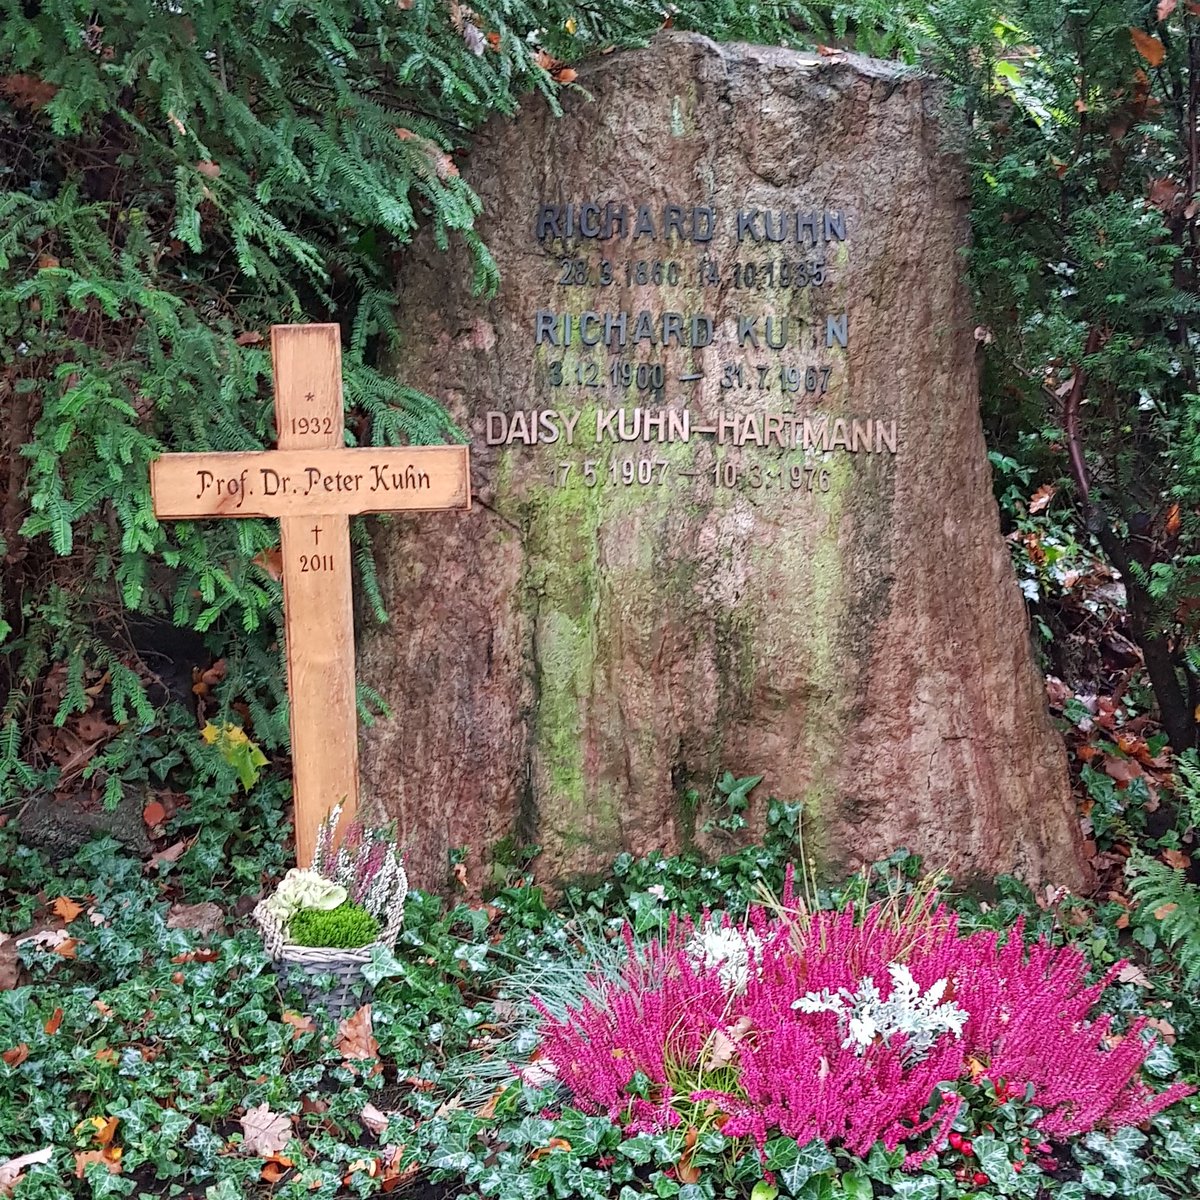 Two more chemists to go before you hit the top on the cemetery. First 1938 nobellist Richard Kuhn. Kuhn refused the Nobel until after the war (Hitler banned accepting), denounced Jewish coworkers and developed the nerve agent Soman during the war.(Wiki:  https://en.wikipedia.org/wiki/Richard_Kuhn)